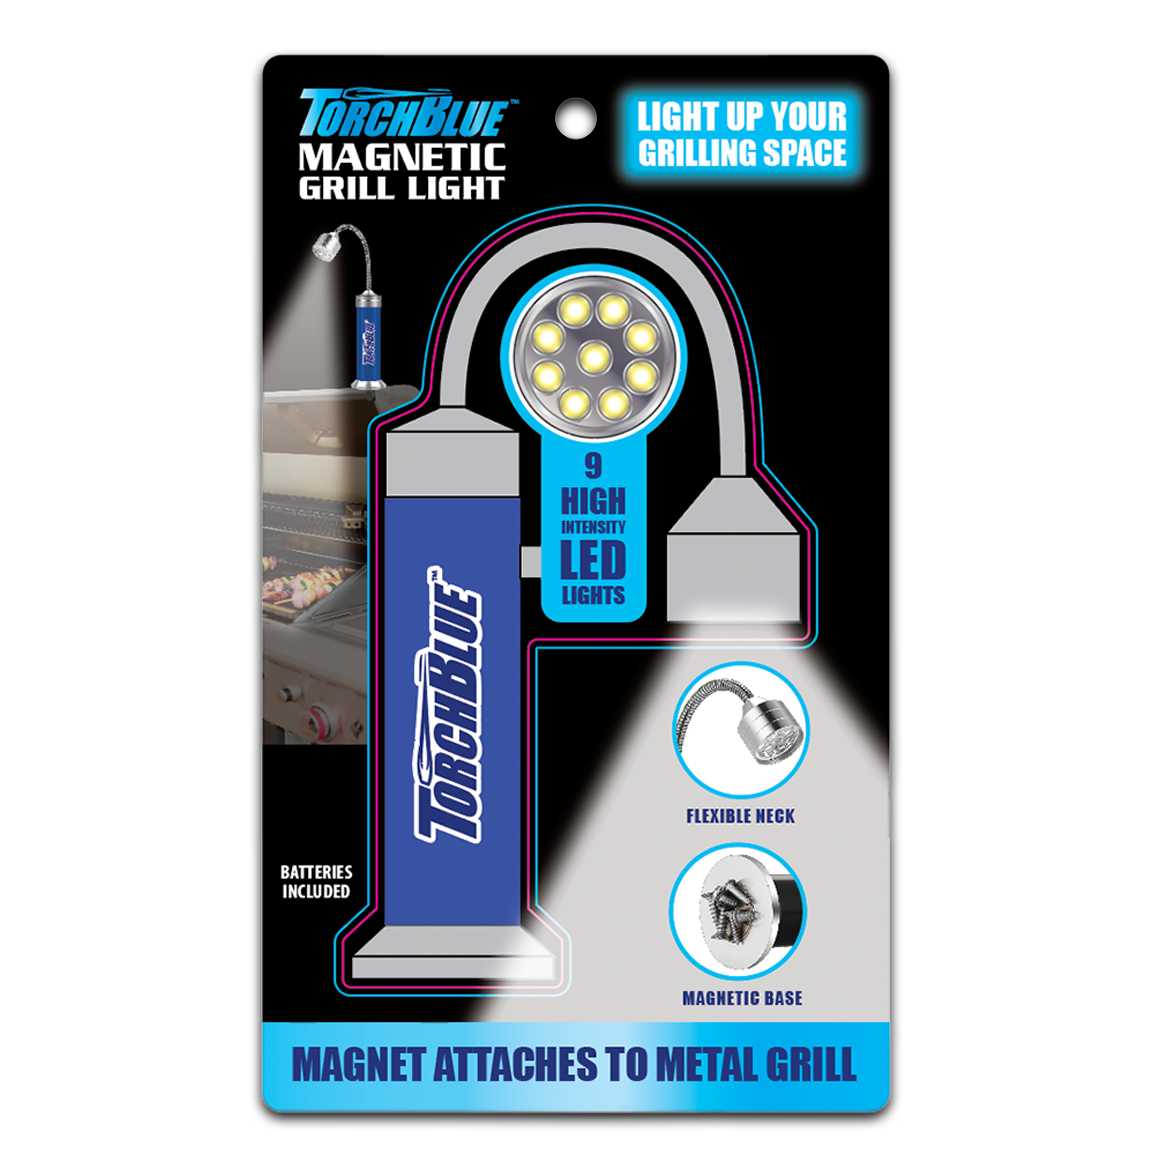 ITEM NUMBER 023848 TORCH BLUE MAGNETIC GRILL LIGHT 6 PIECES PER DISPLAY